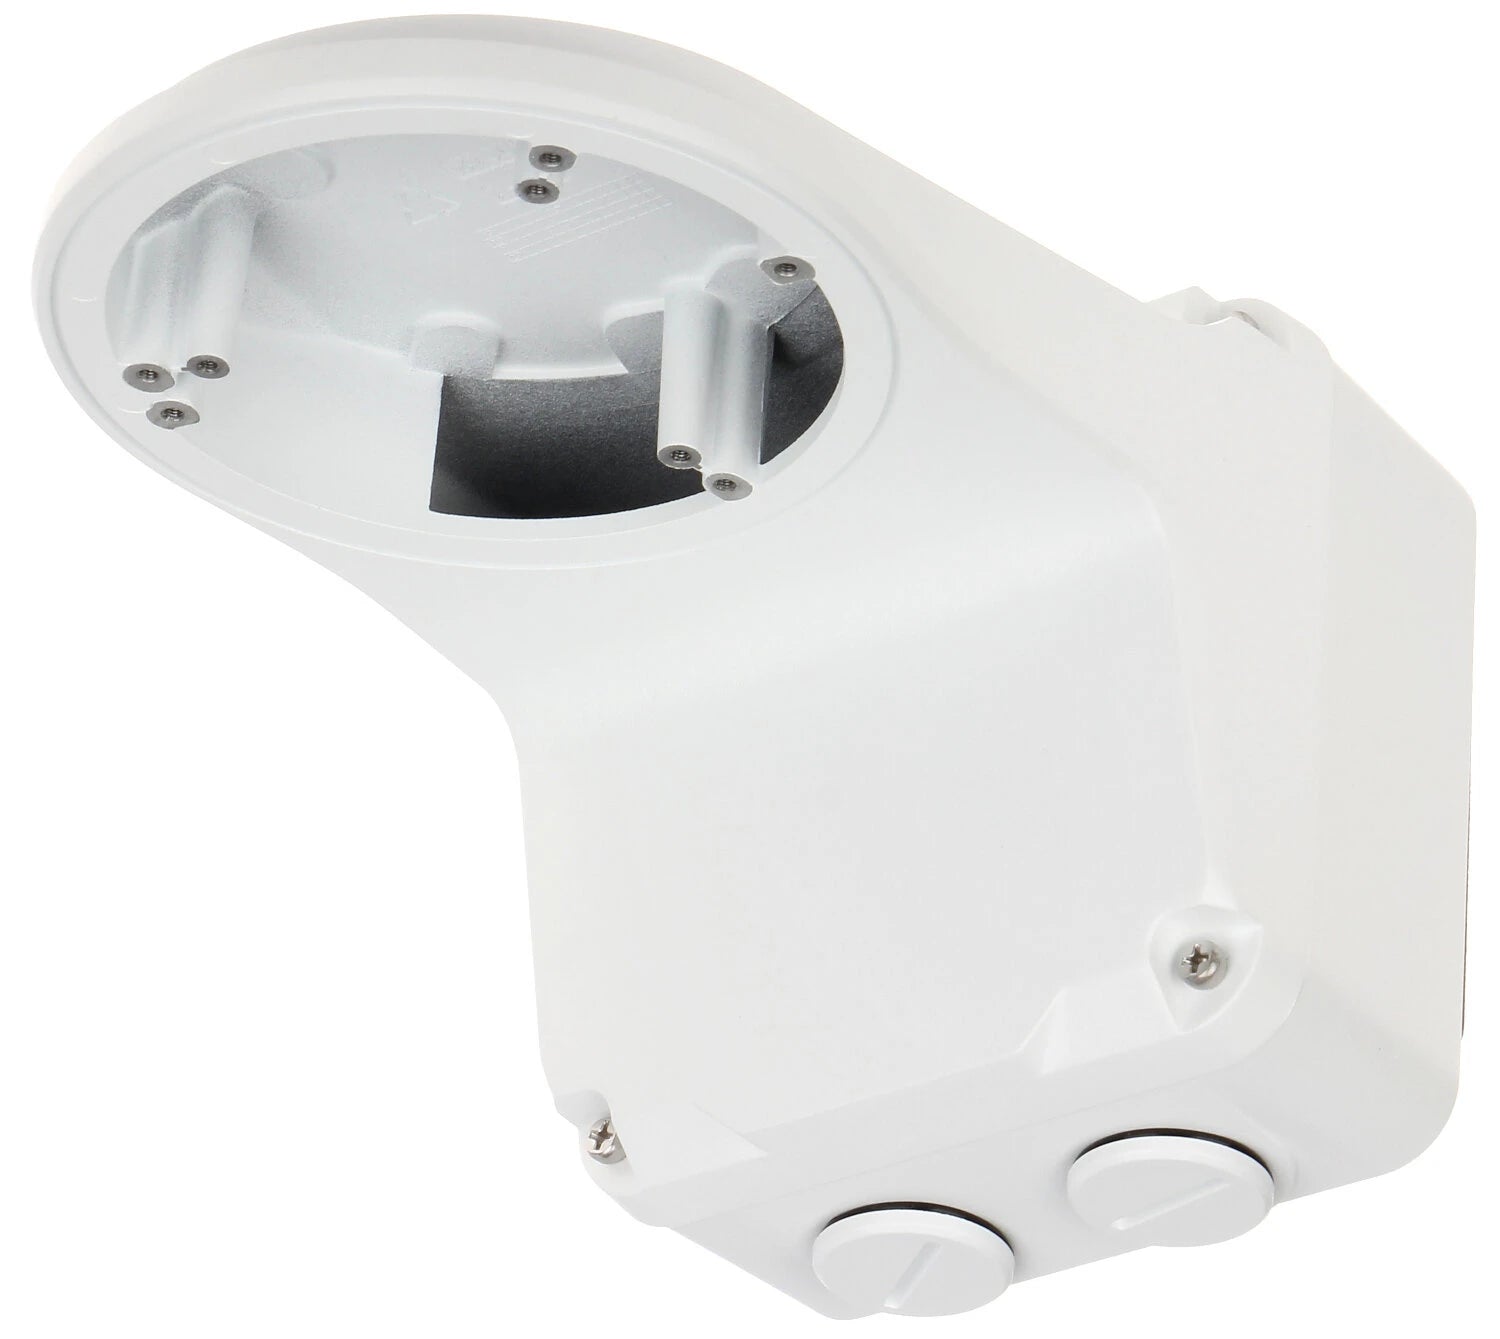 Uniarch Wall mount U-TR-JB07/WM03-G-IN Bracket with Junction Box for Turret Dome